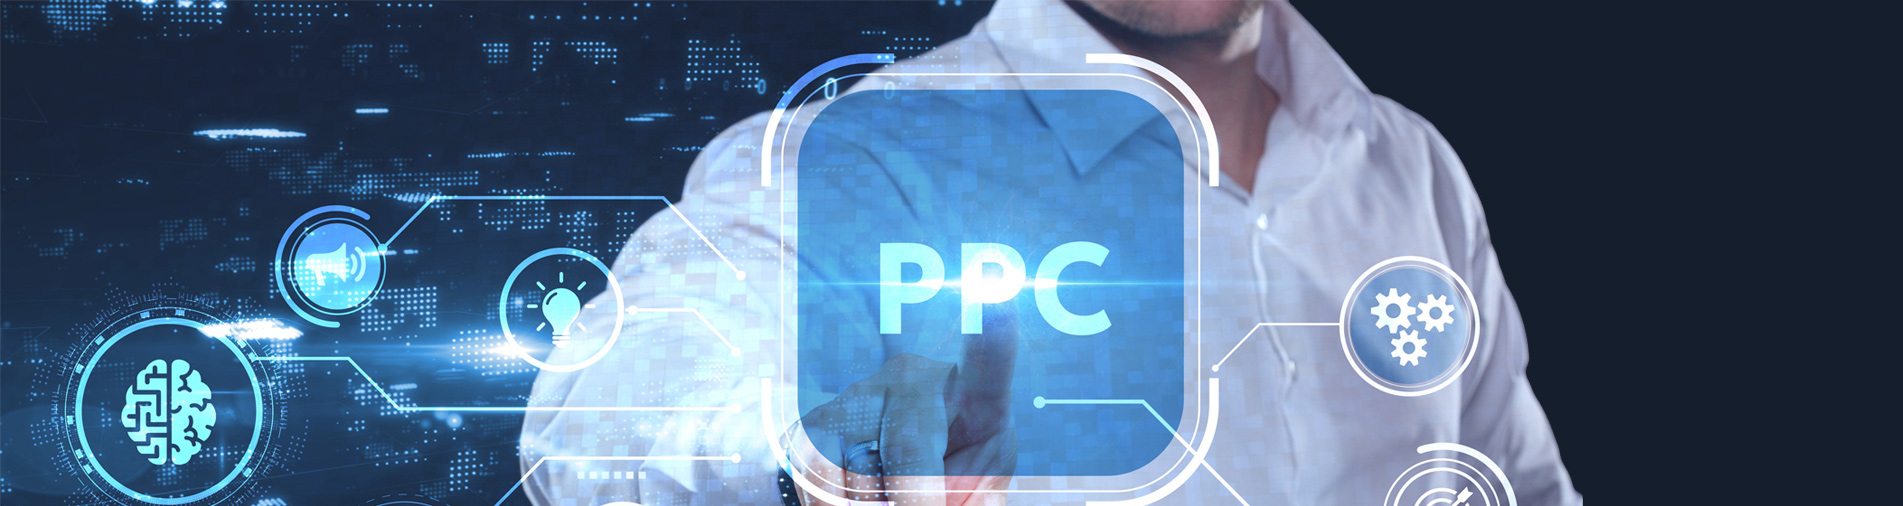 PPC Marketing Tips for Healthcare and Medical Professionals